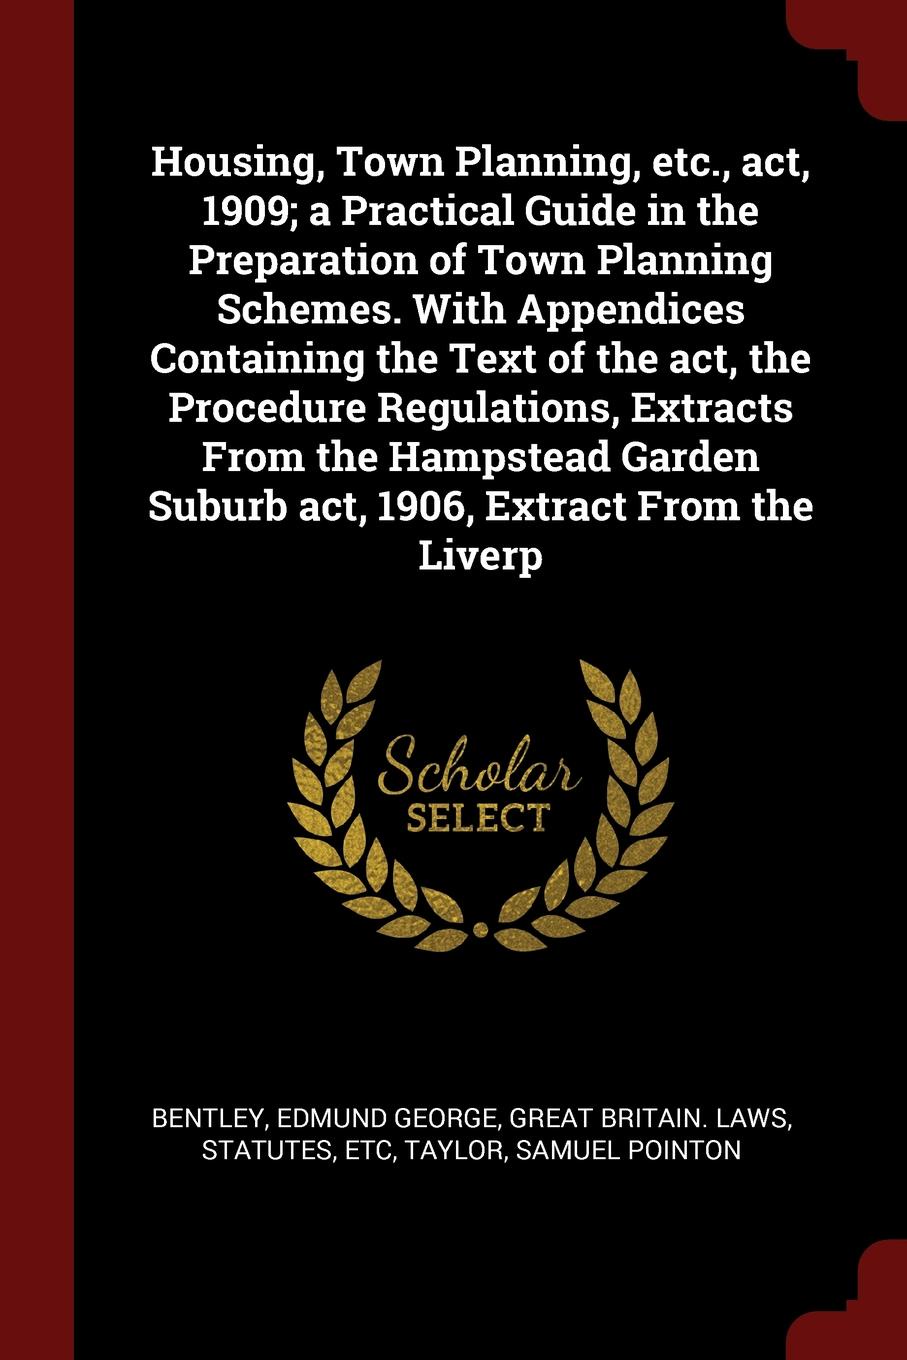 Housing, Town Planning, etc., act, 1909; a Practical Guide in the Preparation of Town Planning Schemes. With Appendices Containing the Text of the act, the Procedure Regulations, Extracts From the Hampstead Garden Suburb act, 1906, Extract From th...